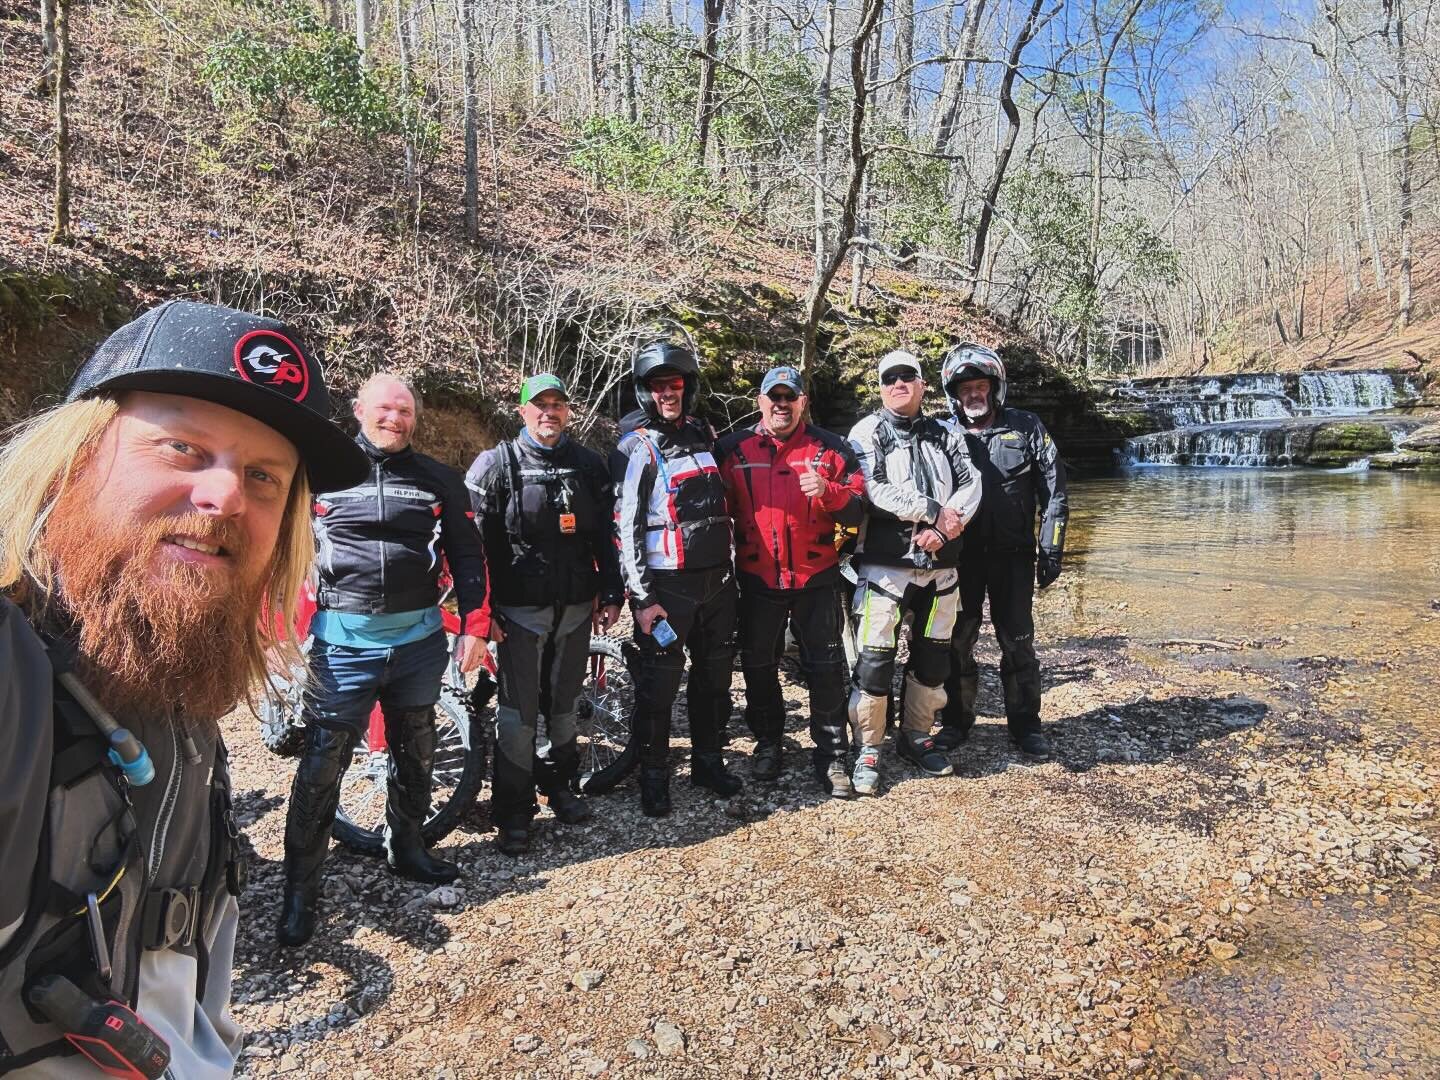 Made some amazing memories this weekend at Tennessee Twister. 
Thanks to new friends and dirt roads 
@slavensracing 
@cardosystems 
@klim 
@greenchileadv 
@ssidecals